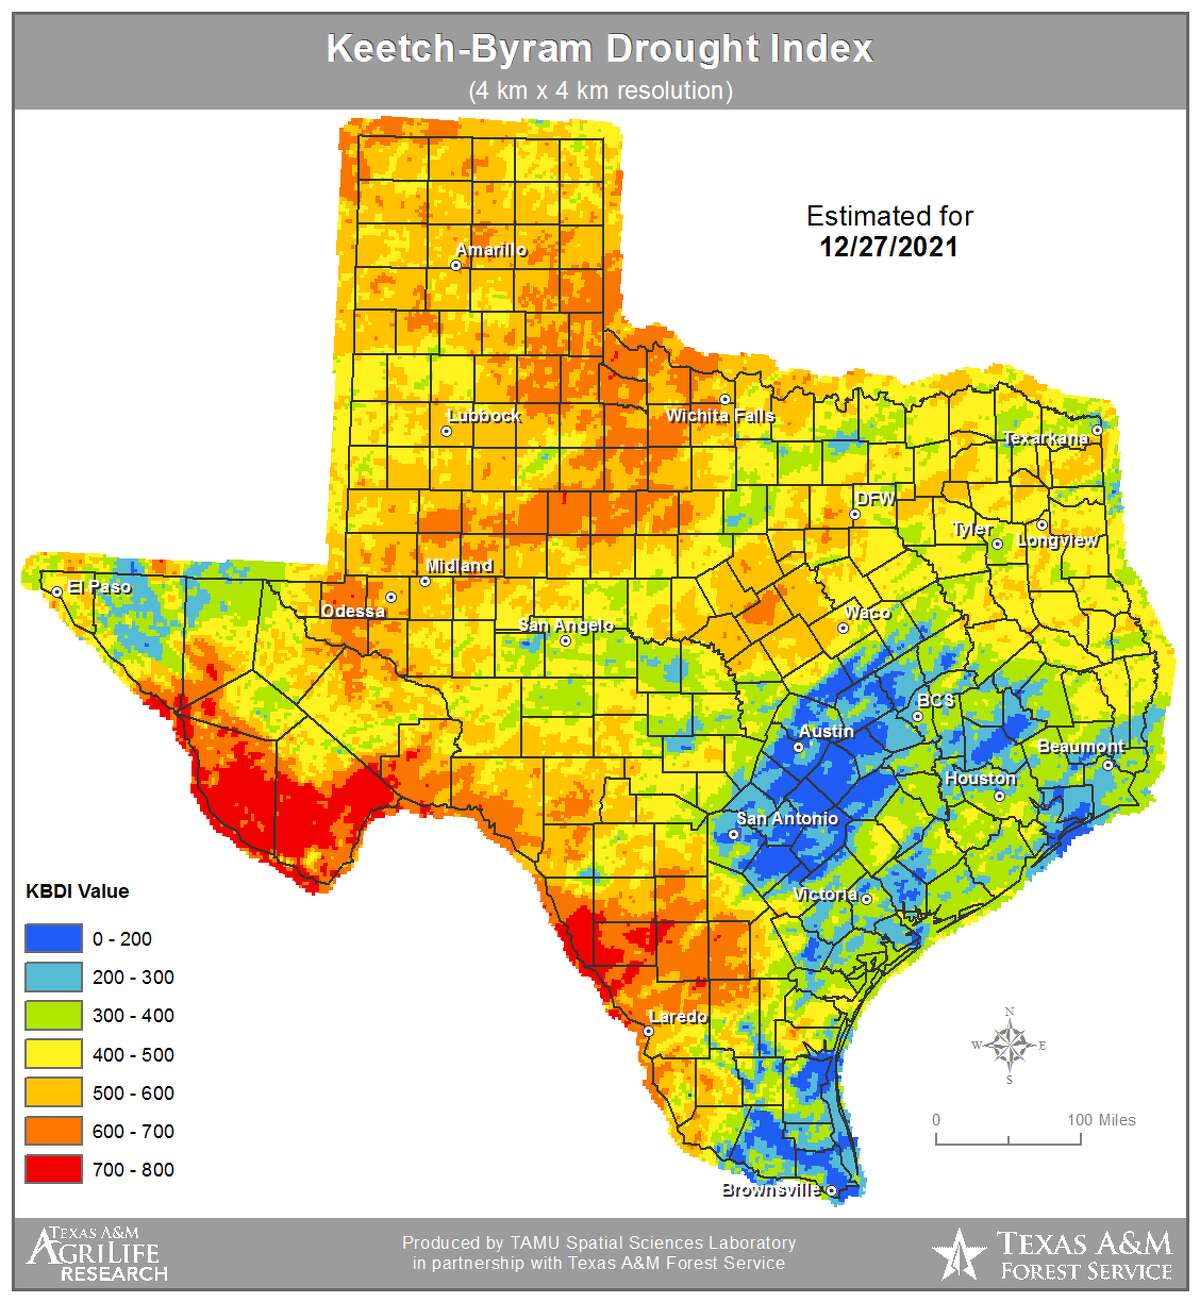 KBI references the Keetch-Byram Drought Index, which is used to determine forest fire potential. The KBDI attempts to measure the amount of precipitation needed to bring the top 8 inches of soil back to saturation, according to the Texas A&M Forest Service.